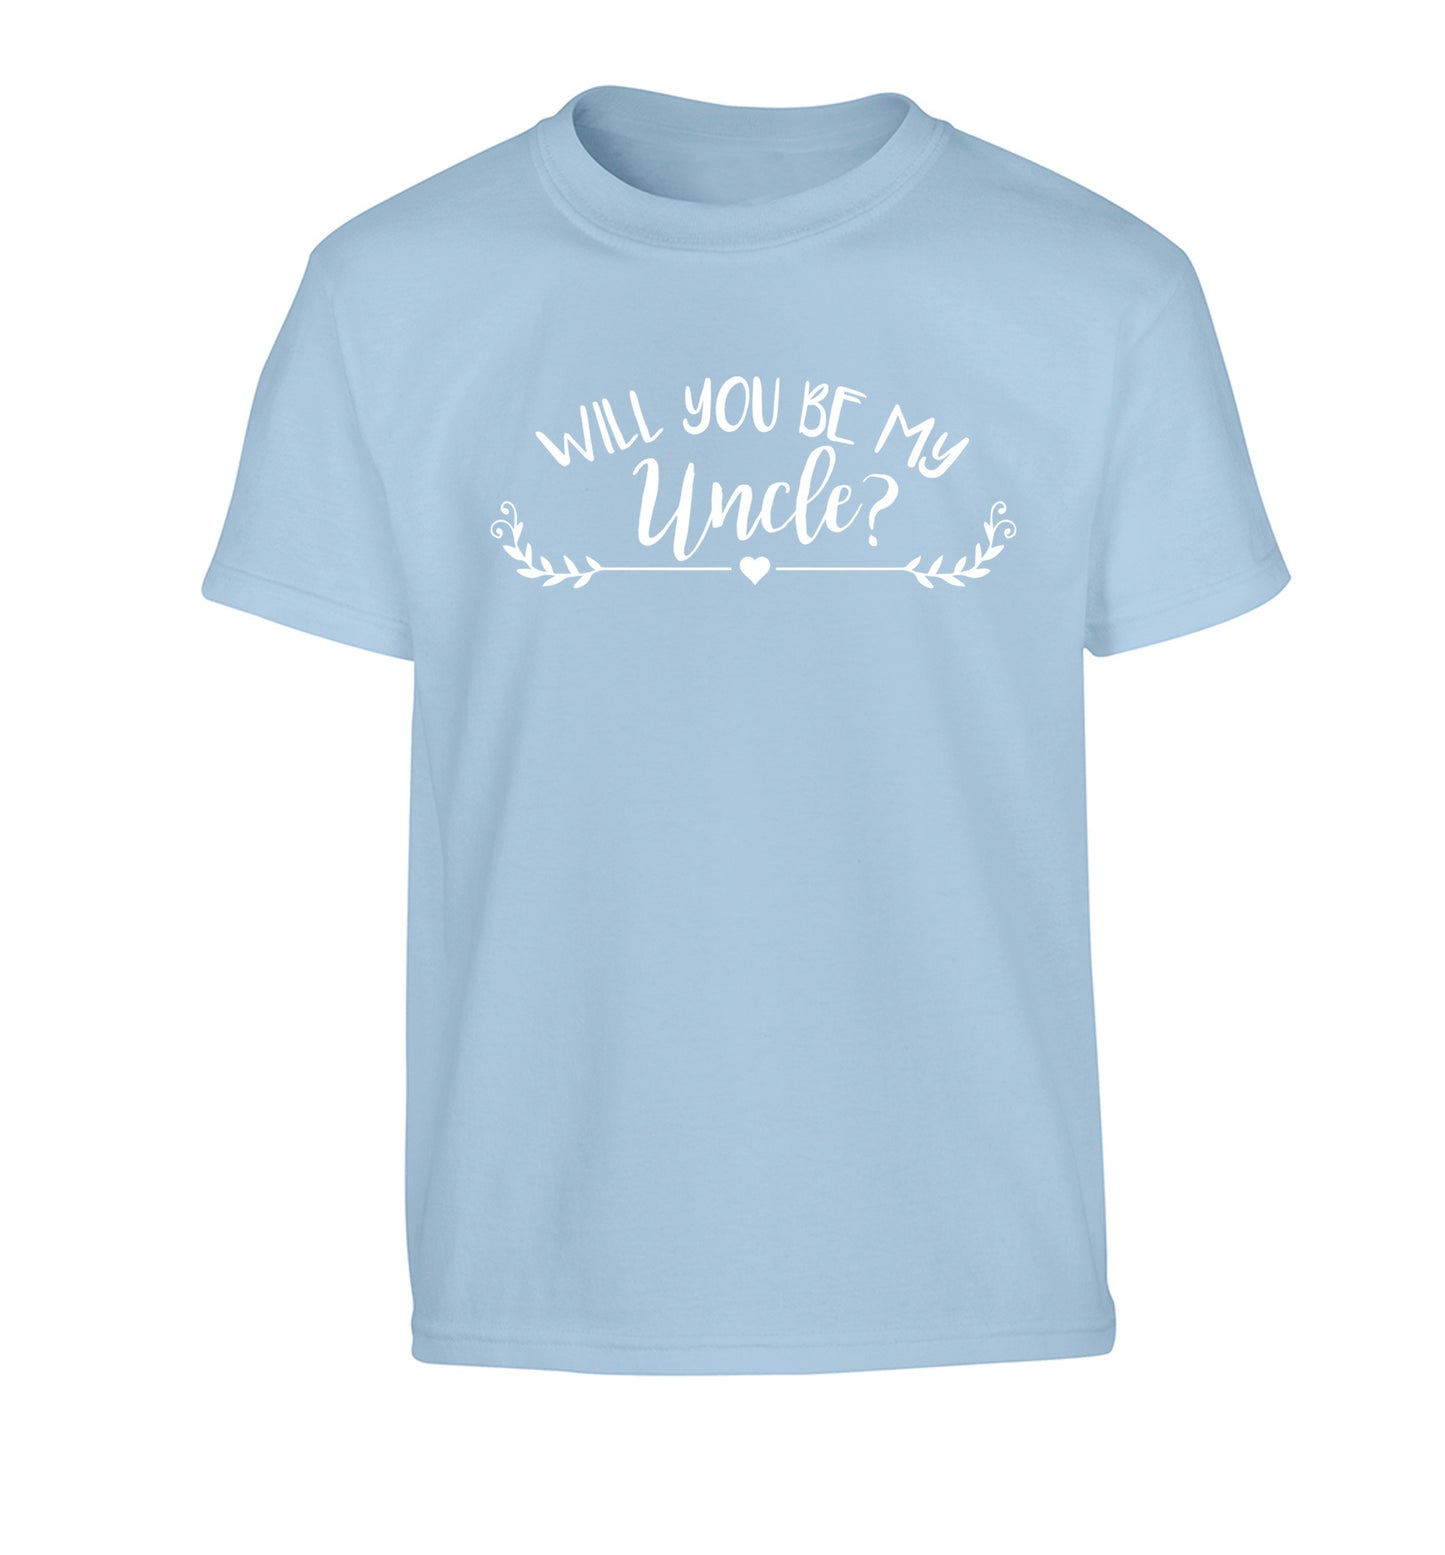 Will you be my uncle? Children's light blue Tshirt 12-14 Years